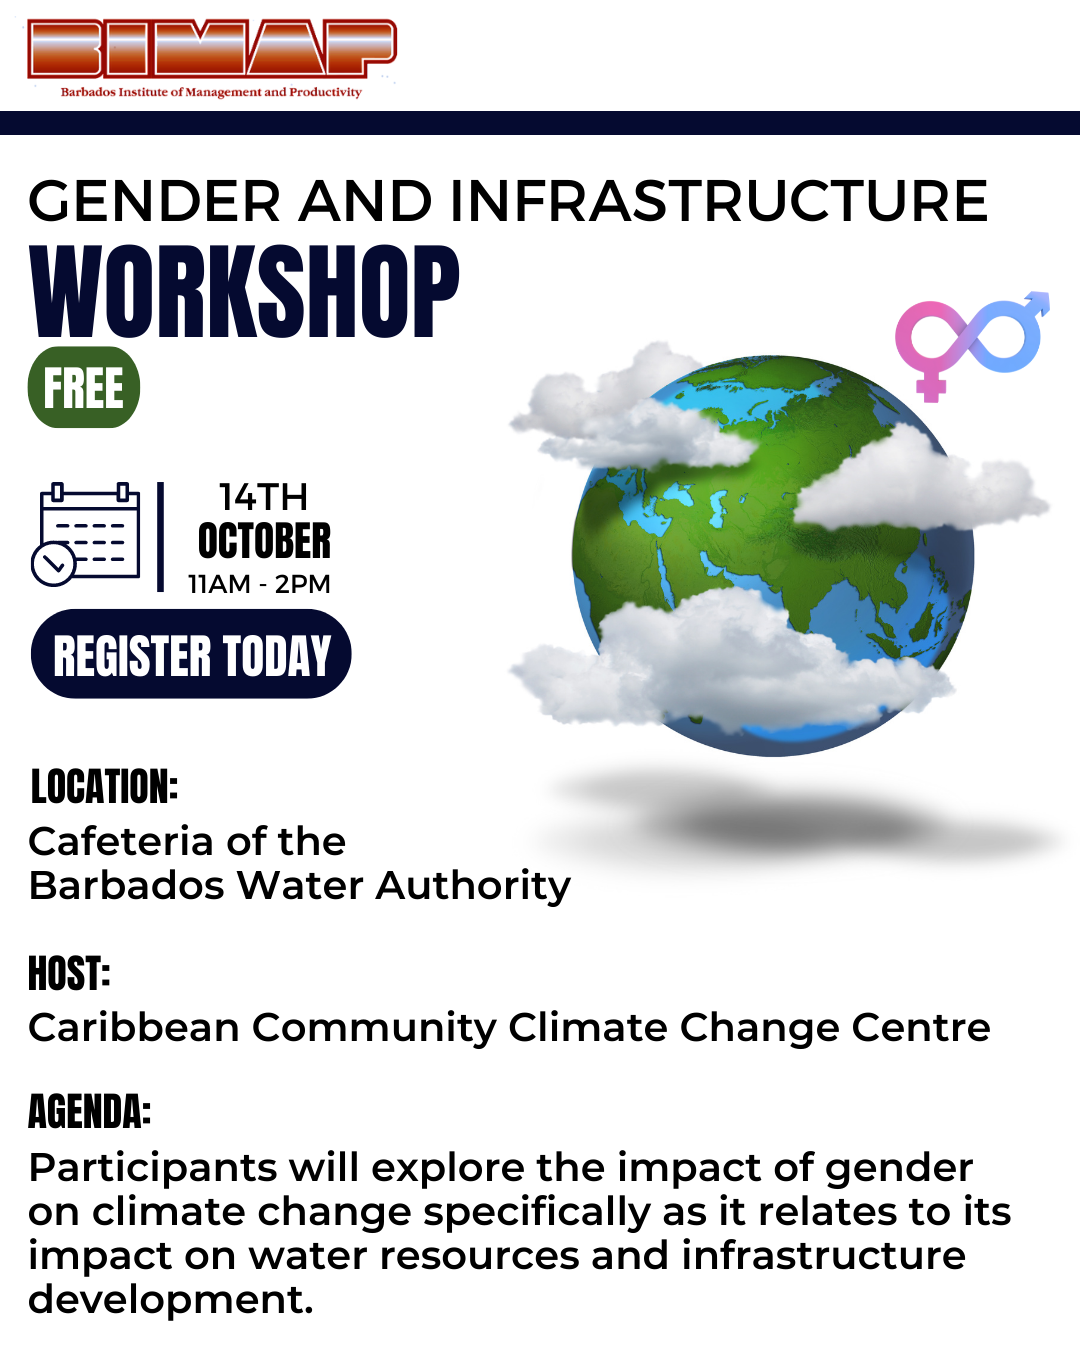 5 C's in collaboration with the Barbados Water Authority is hosting a workshop on the impacts of gender on climate change